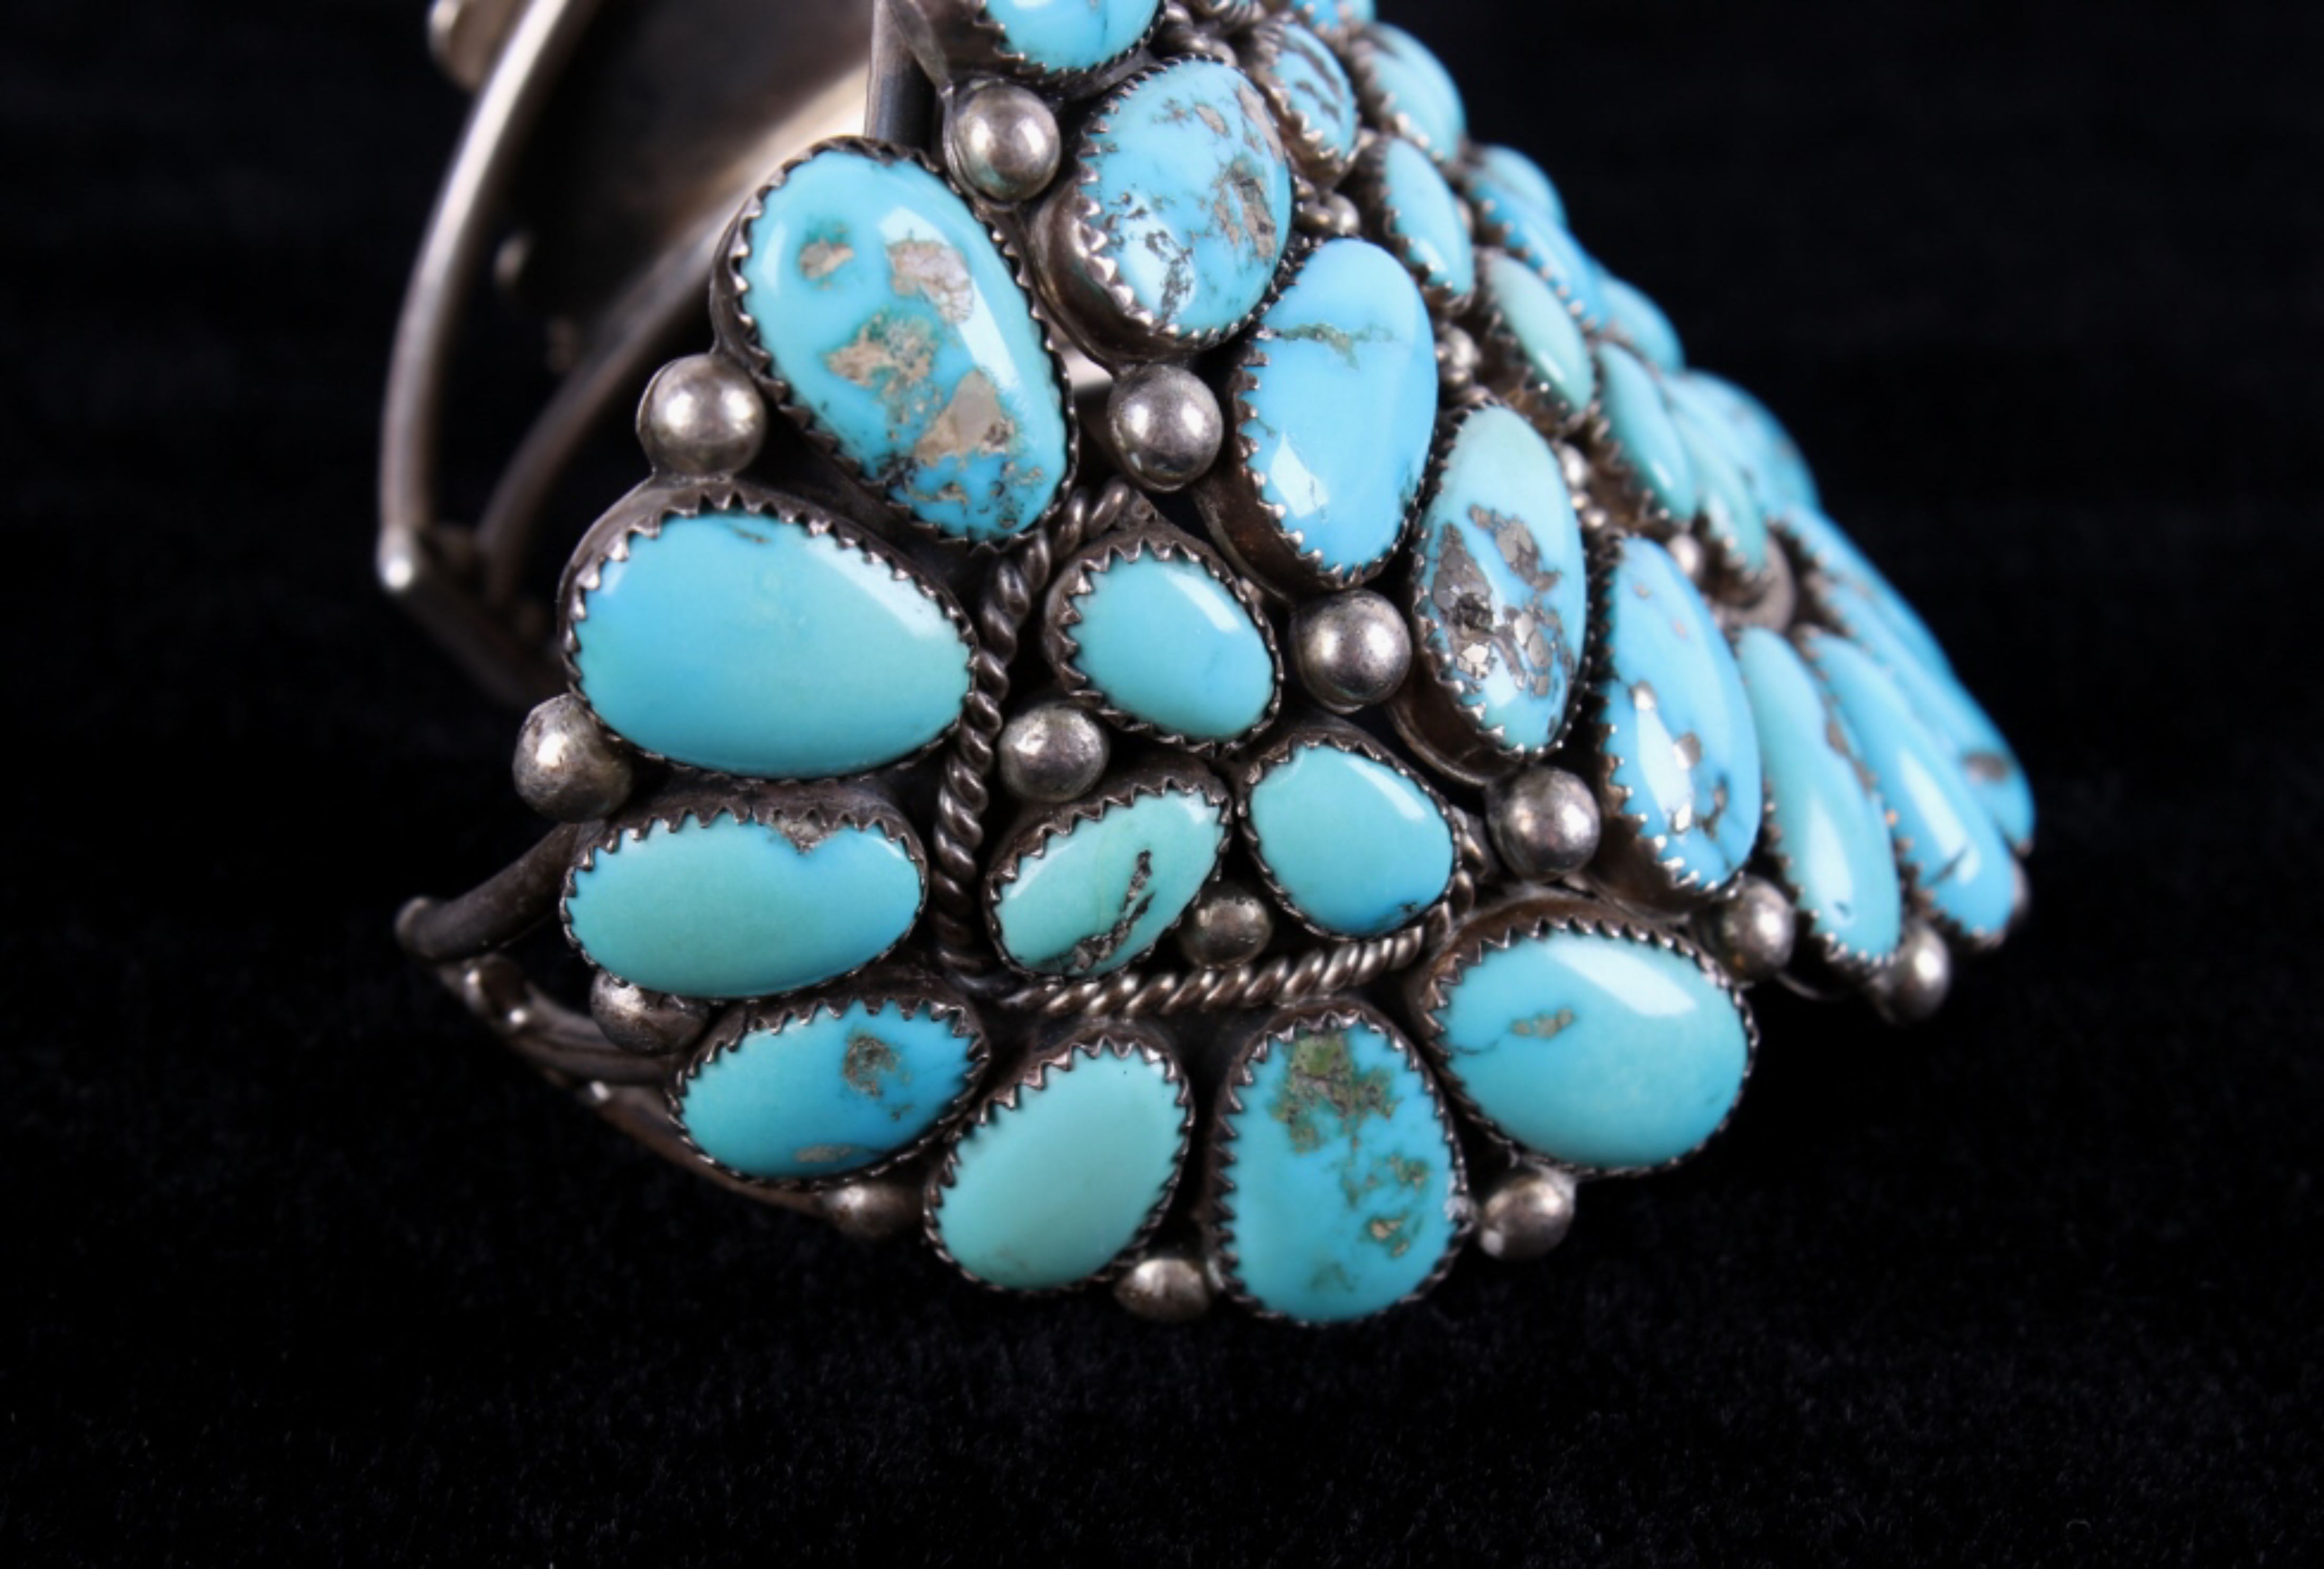 Navajo D.K. Lister Morenci Turquoise Sterling Cuff - Image 4 of 9